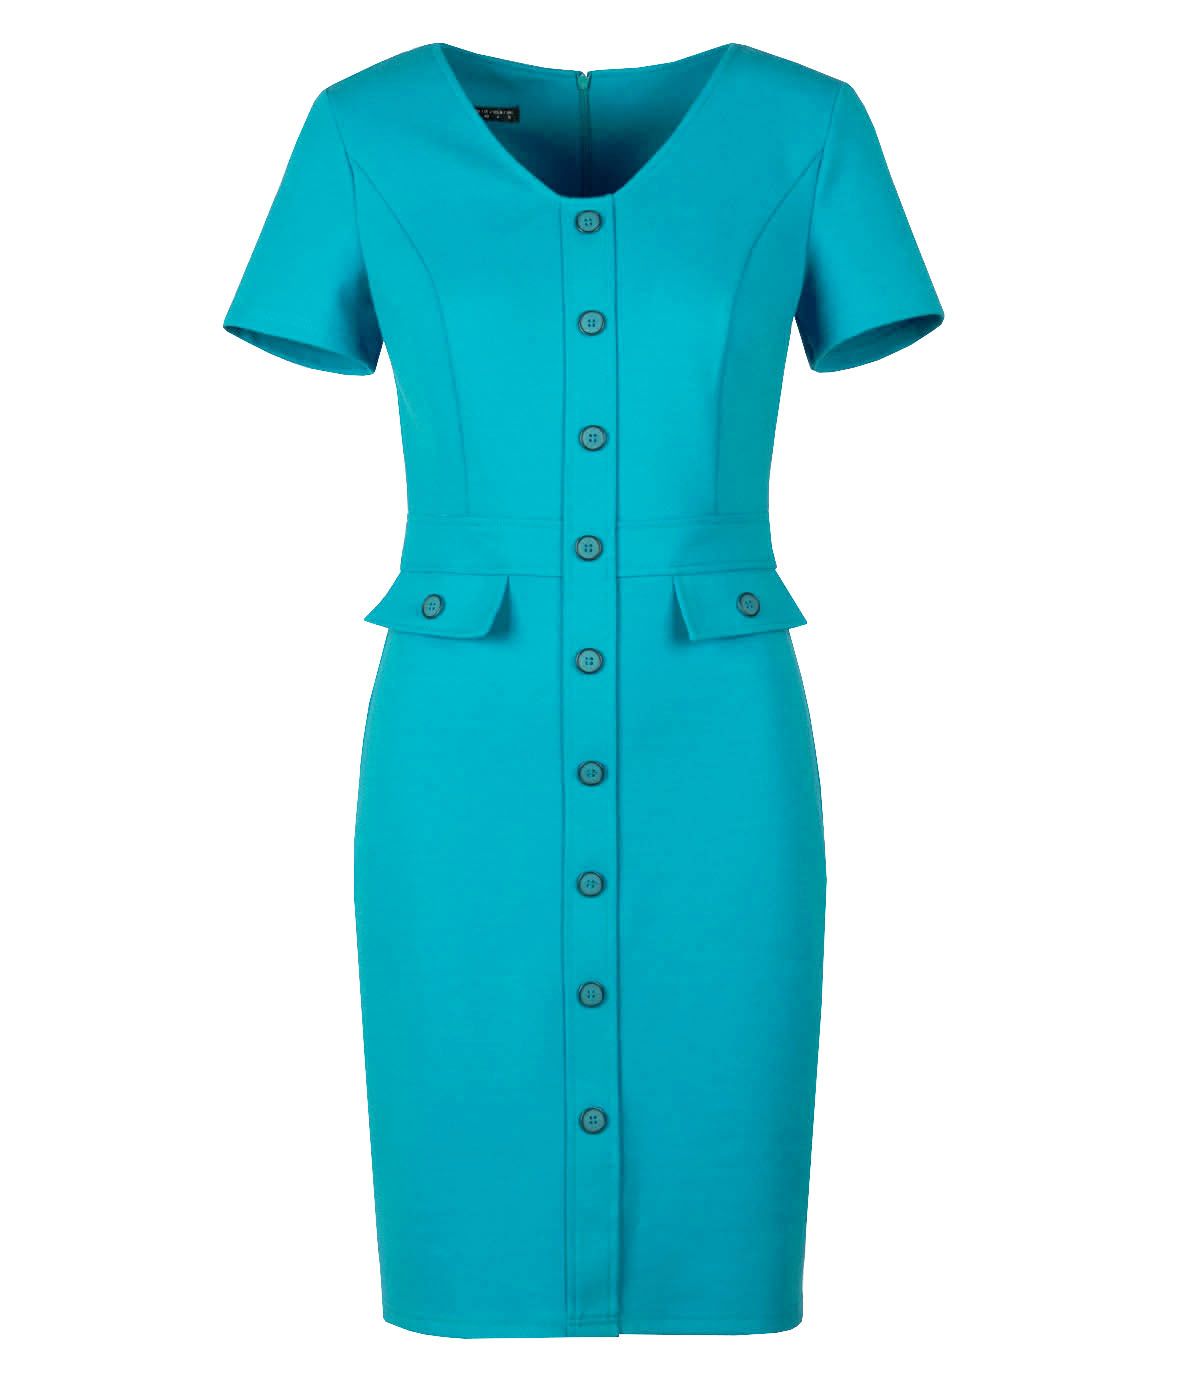 Short-sleeved V-neck dress with decorative front buttoning and concealed zipper on the back 0